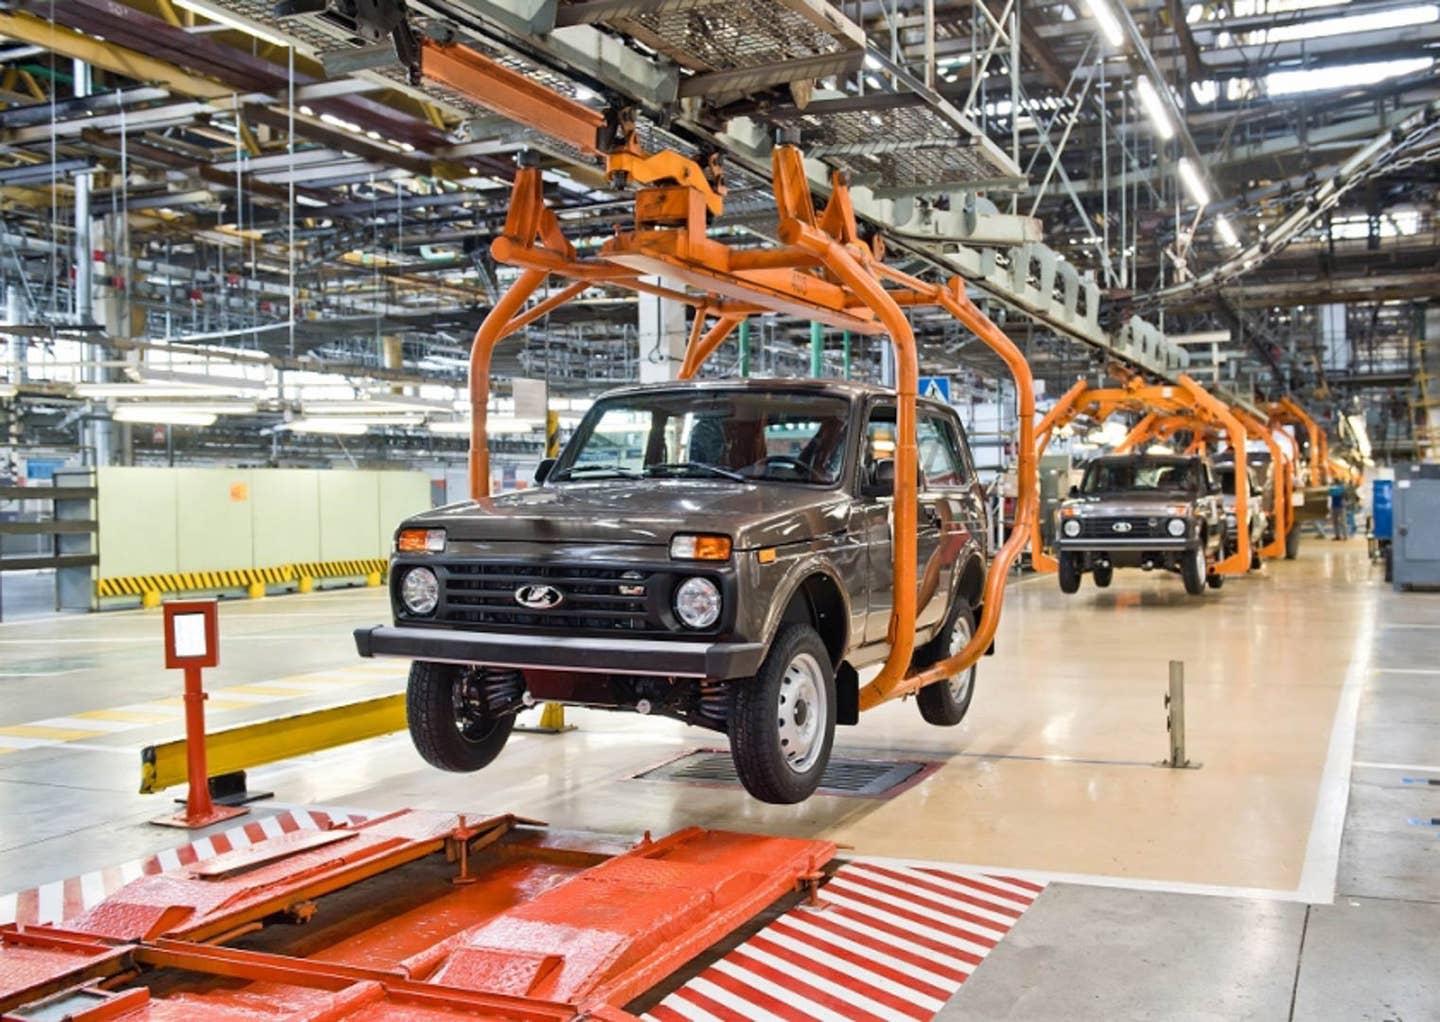 Russia’s Lada Niva Resumes Production After Sanctions With Even Less Tech Than Before